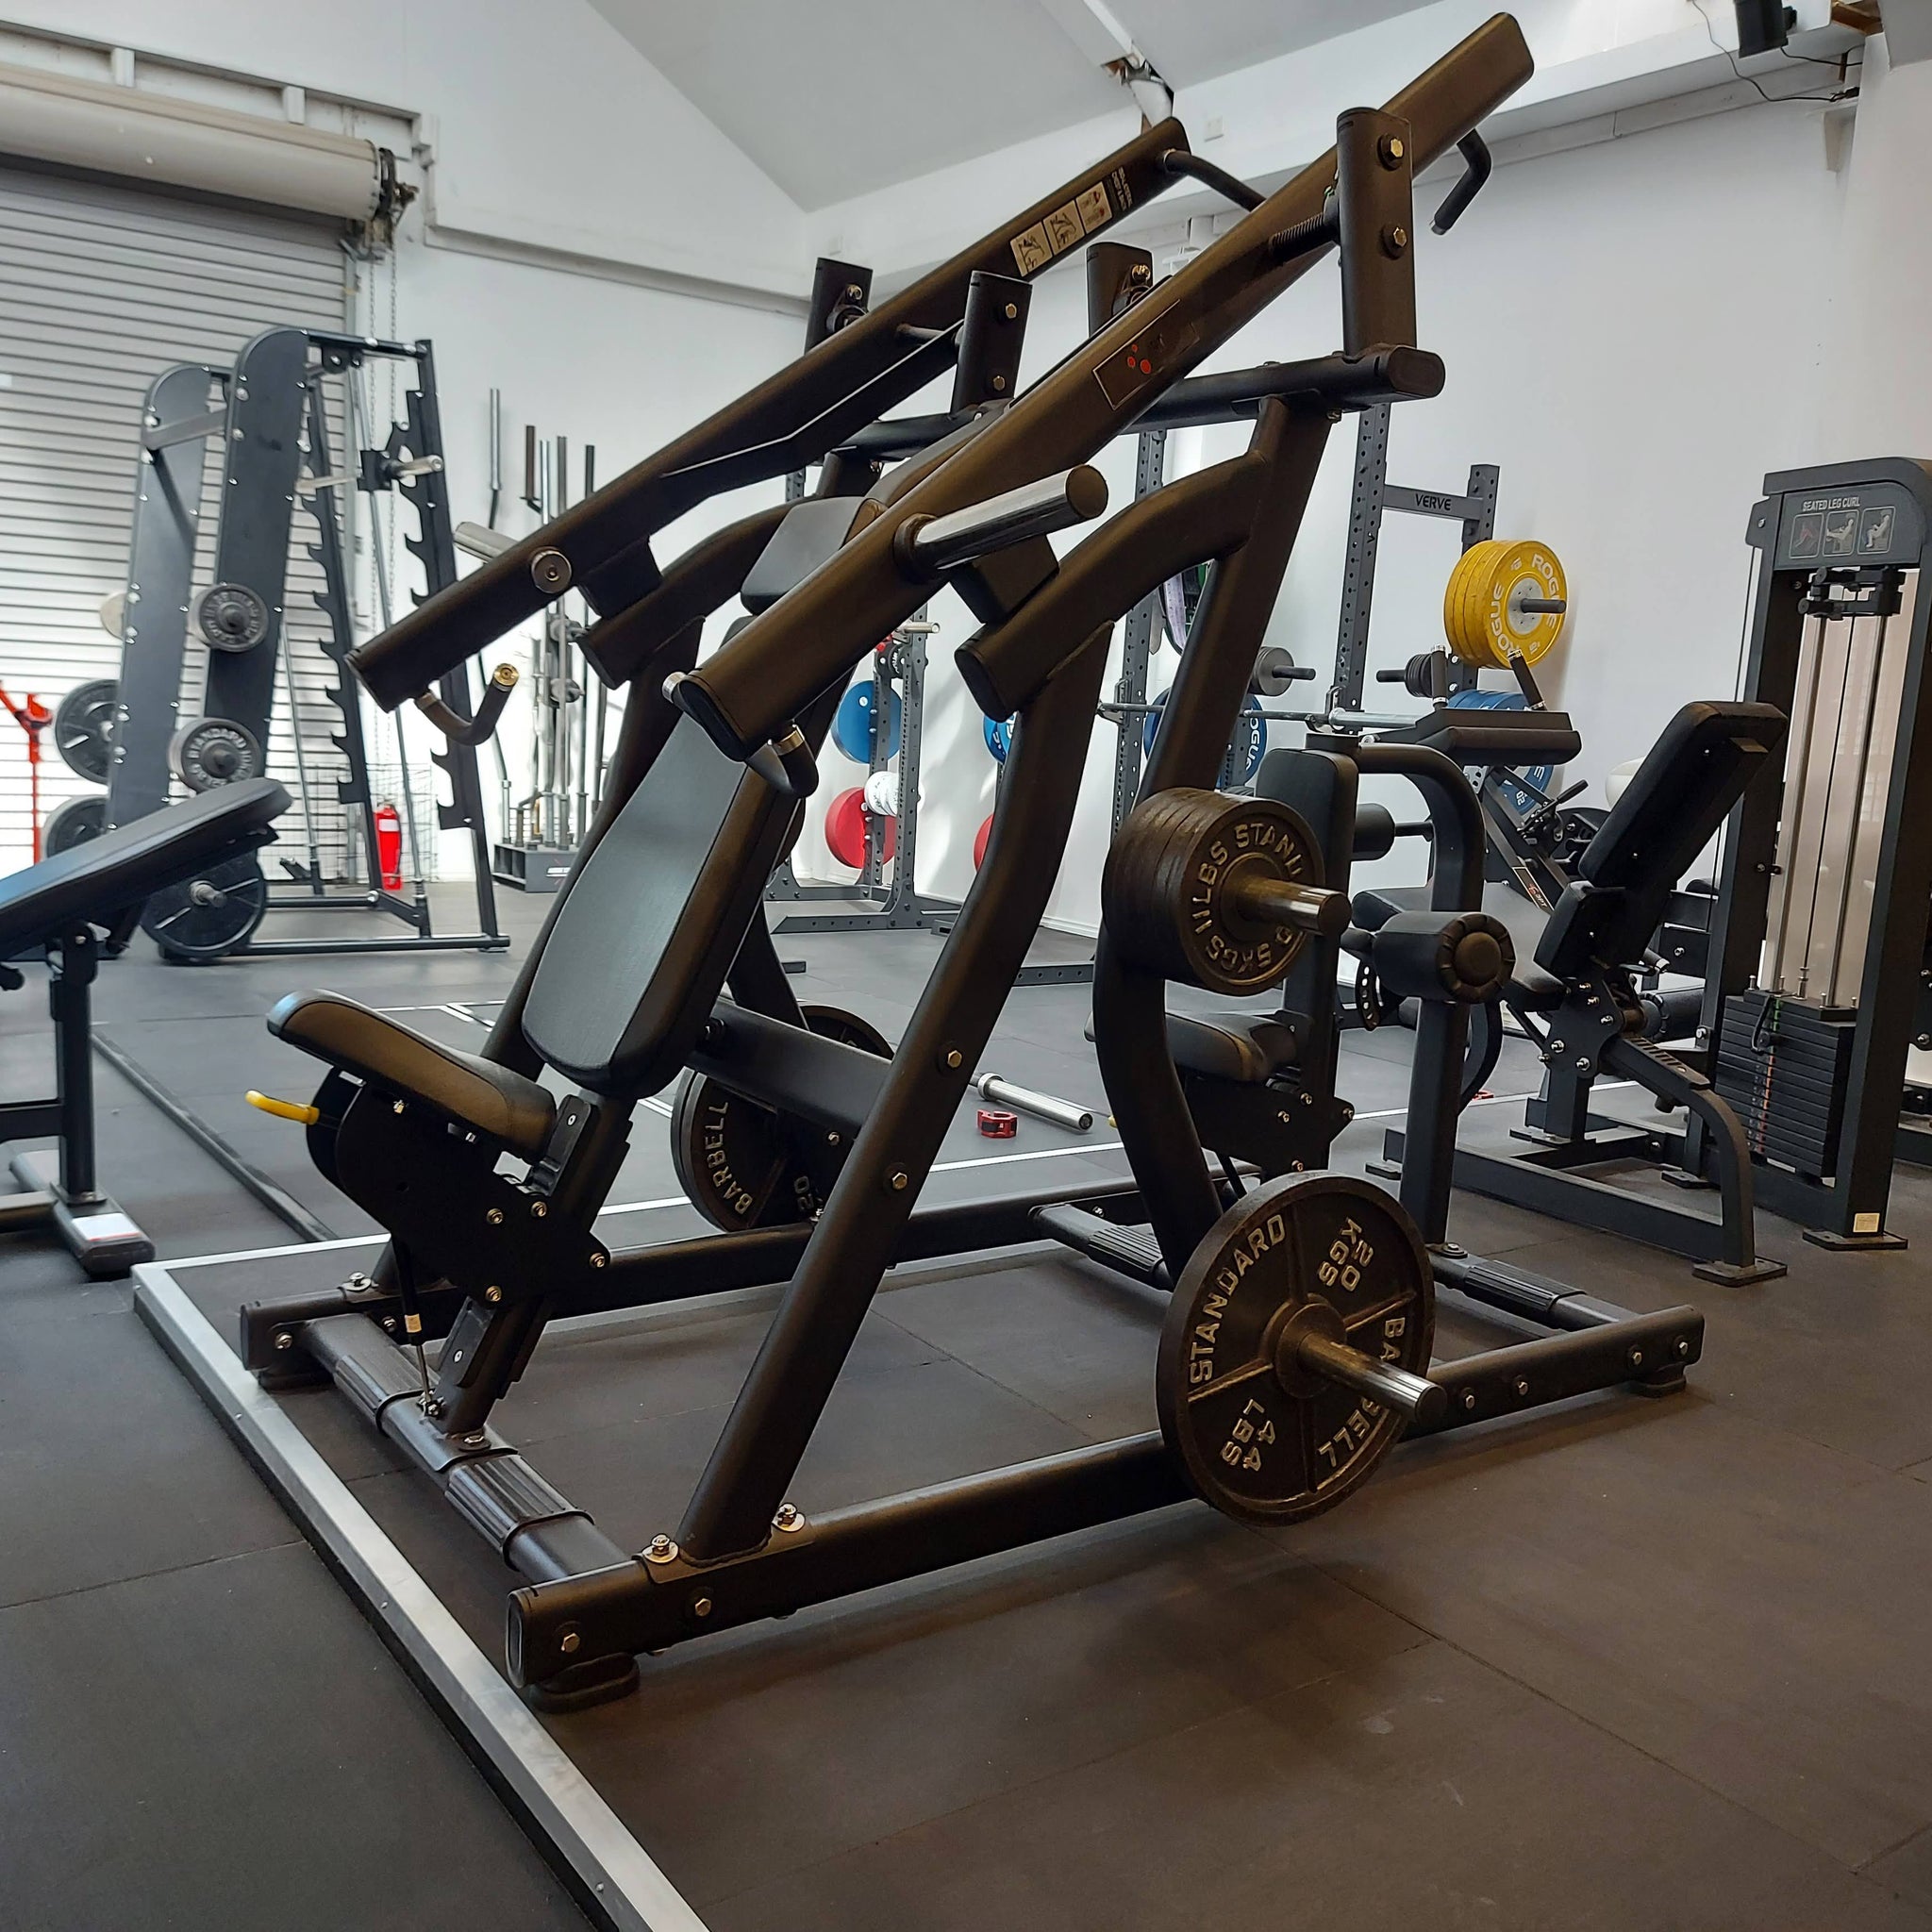 UNLEASH YOUR STRENGTH WITH HIGH-QUALITY PLATE-LOADED STRENGTH EQUIPMENT